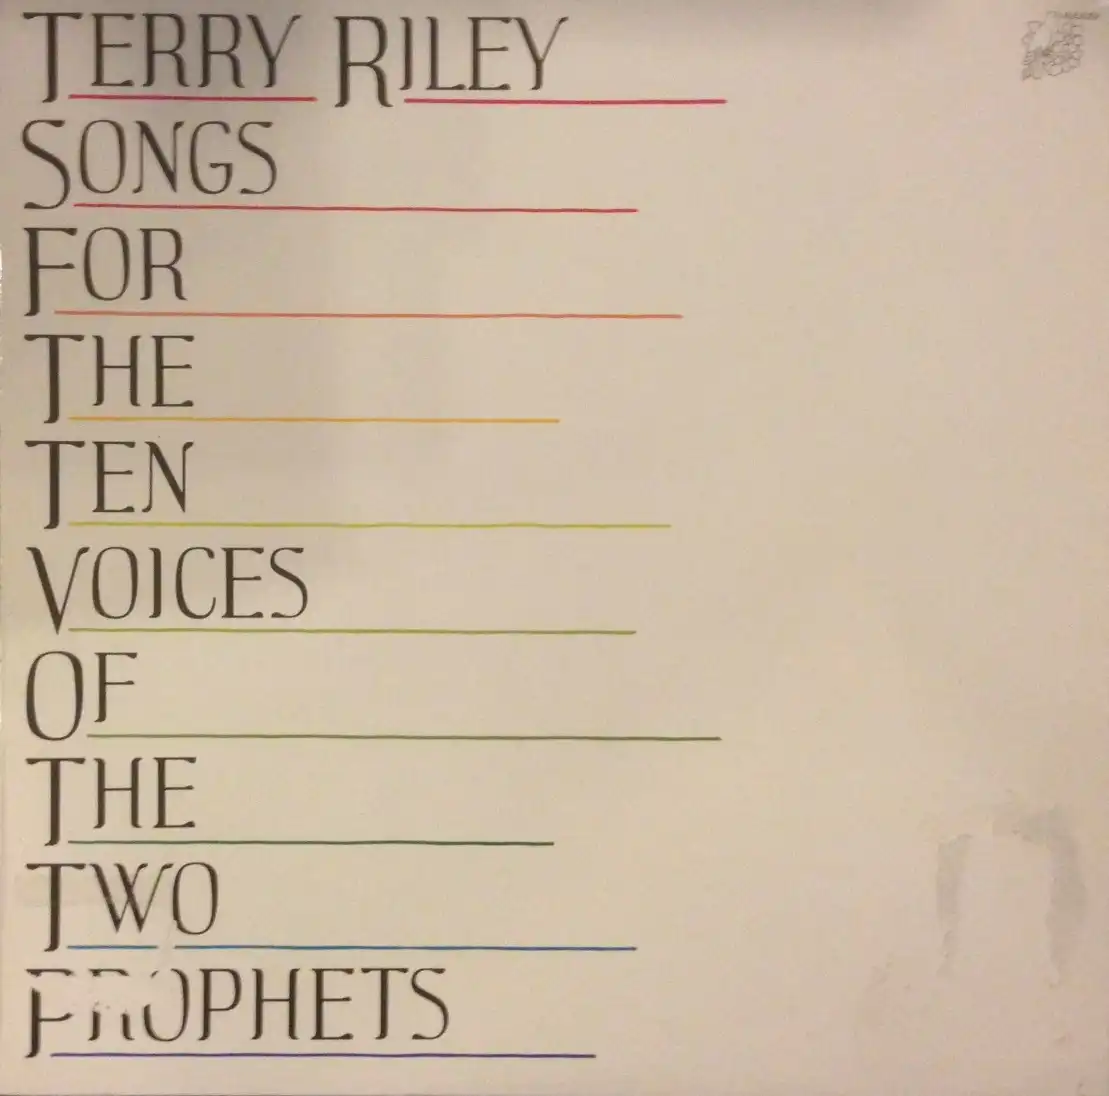 TERRY RILEY / SONGS FOR THE TEN VOICES OF THE TWO PROPHETS